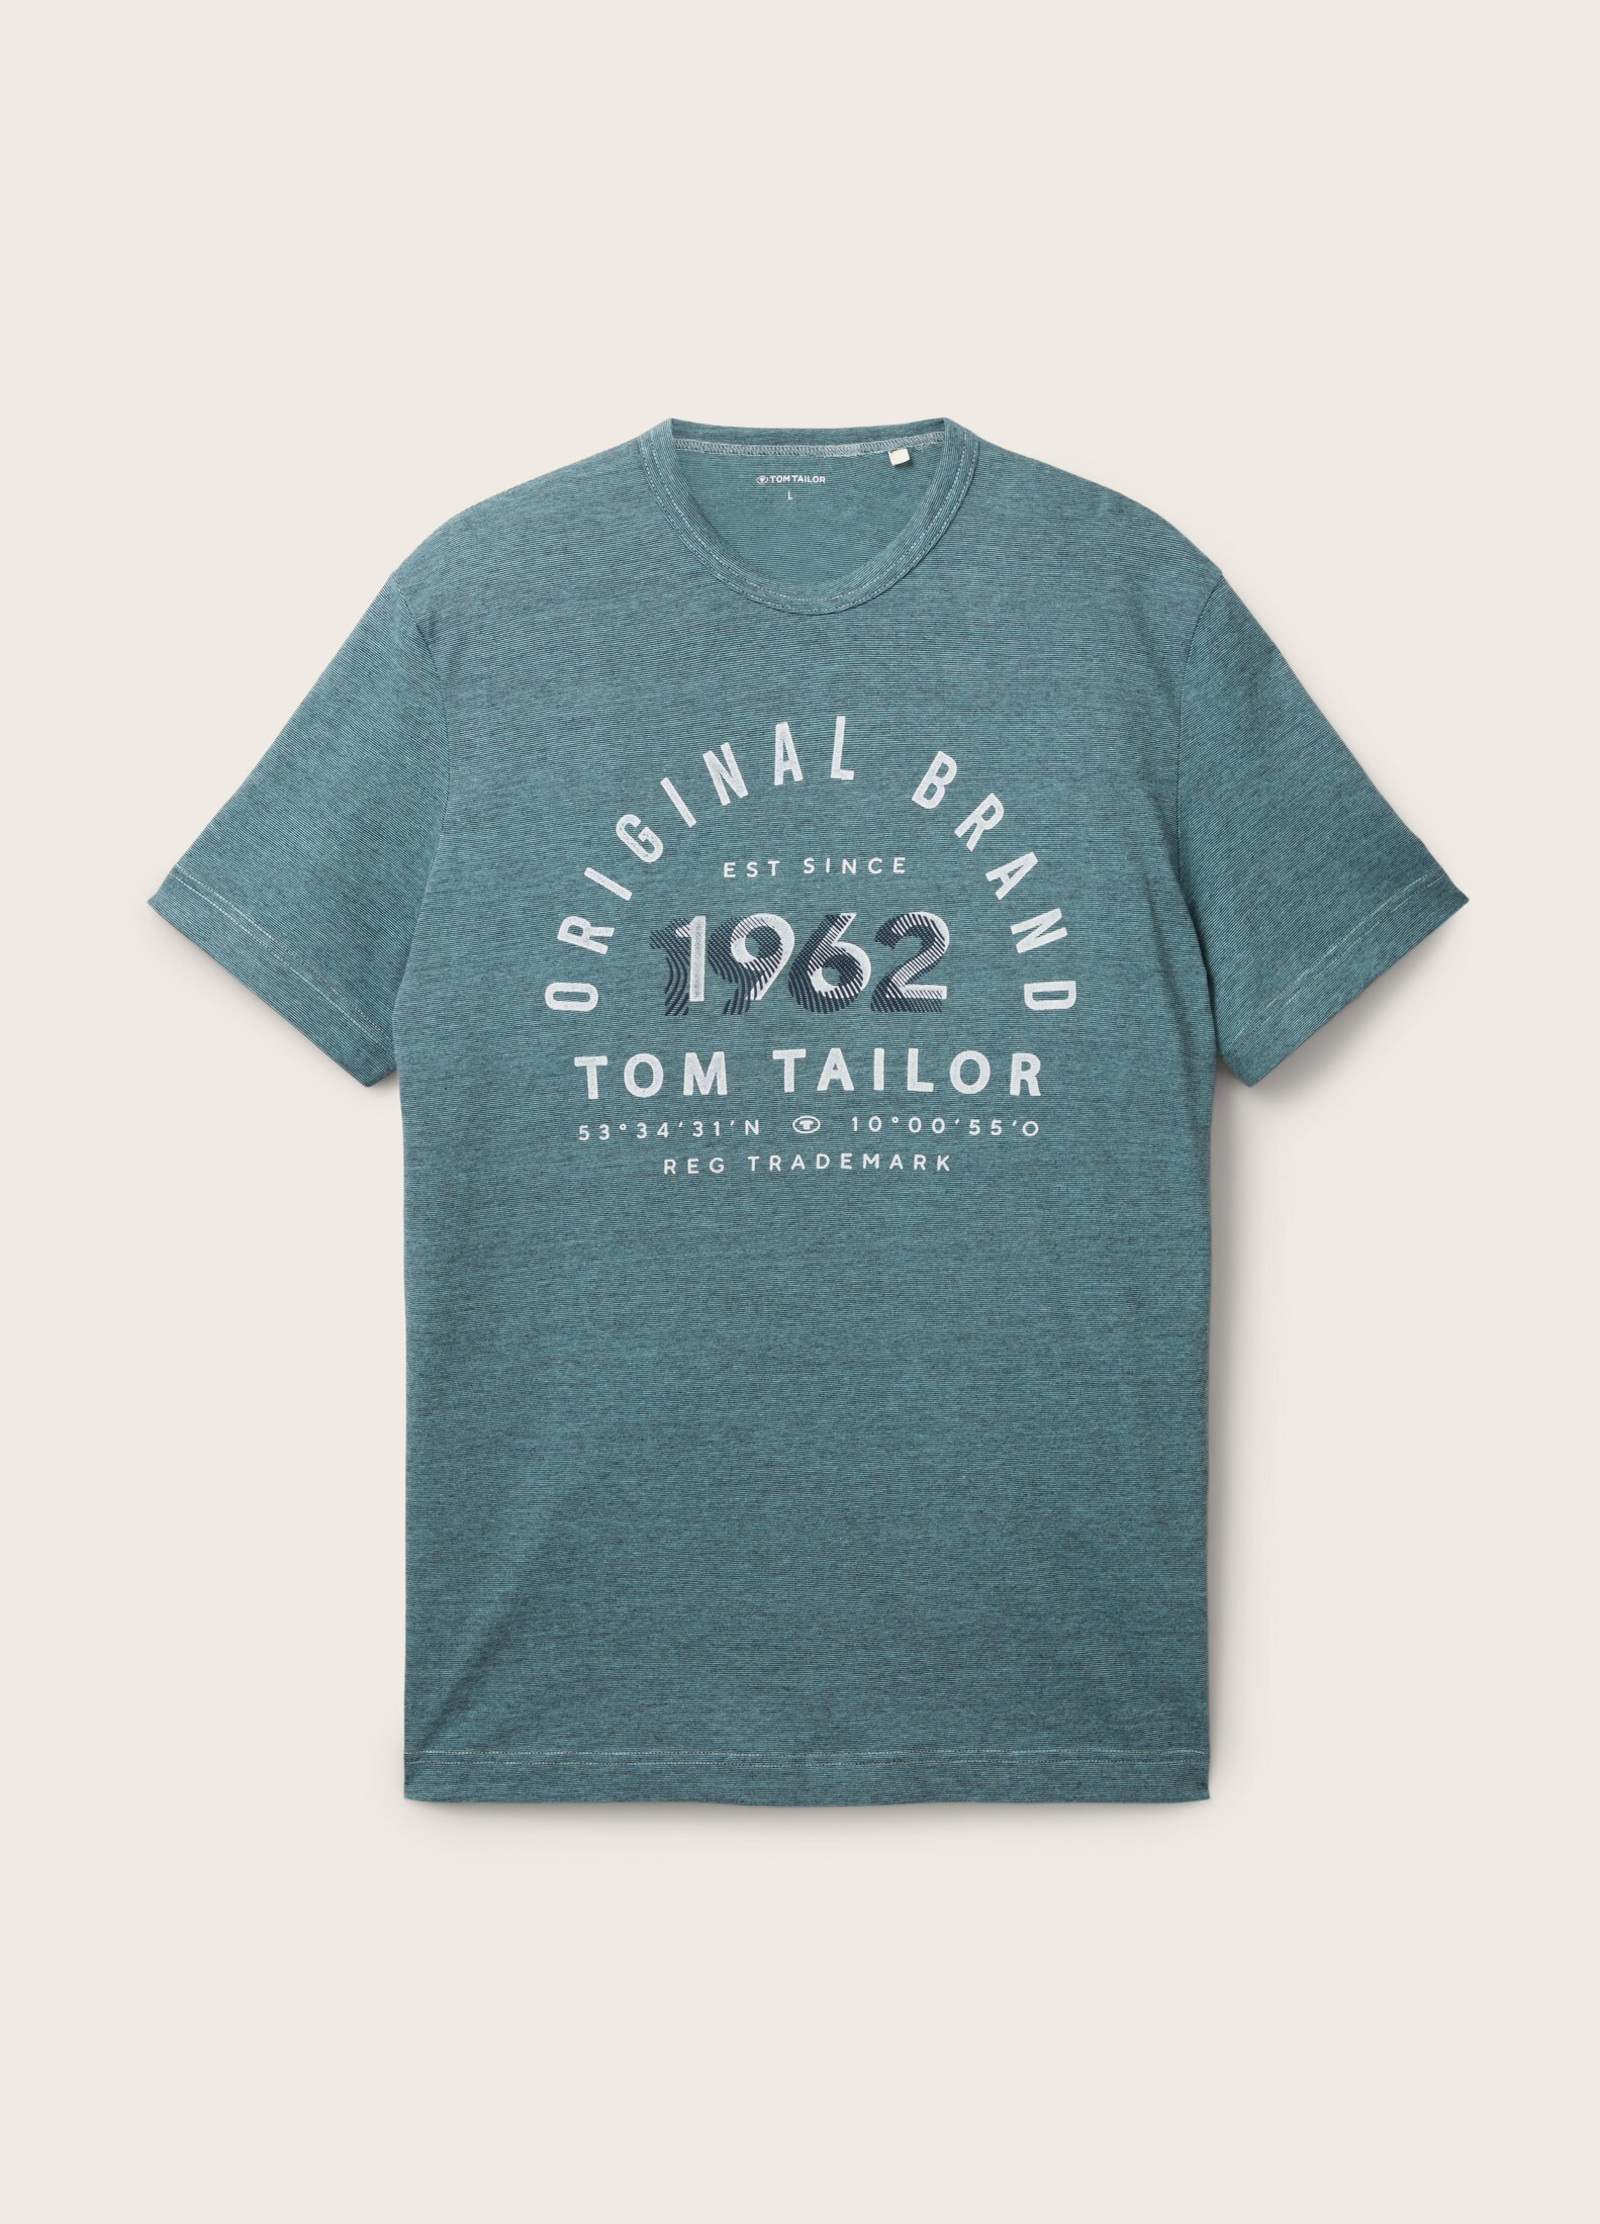 Tom Tailor® T-shirt With A Print - Navy Blue Stone Fine Stripe Size L